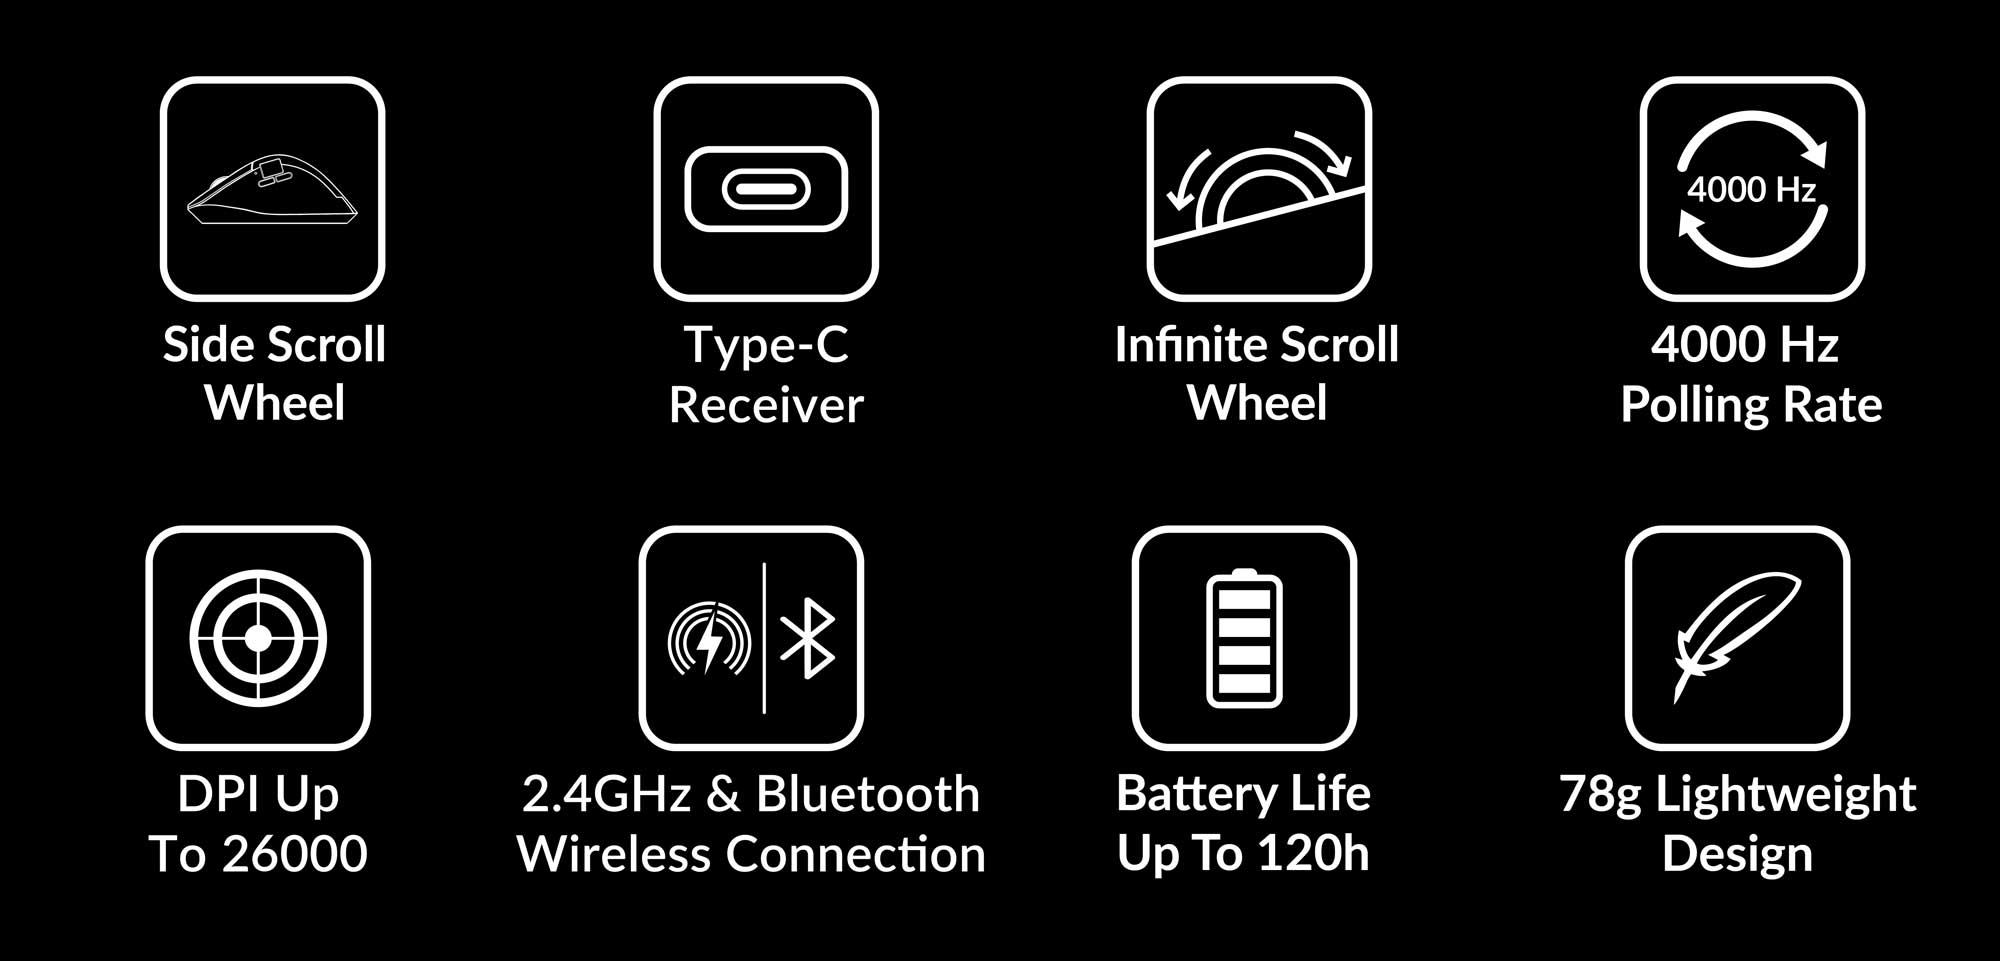 features of the Keychron M6 4K wireless mouse